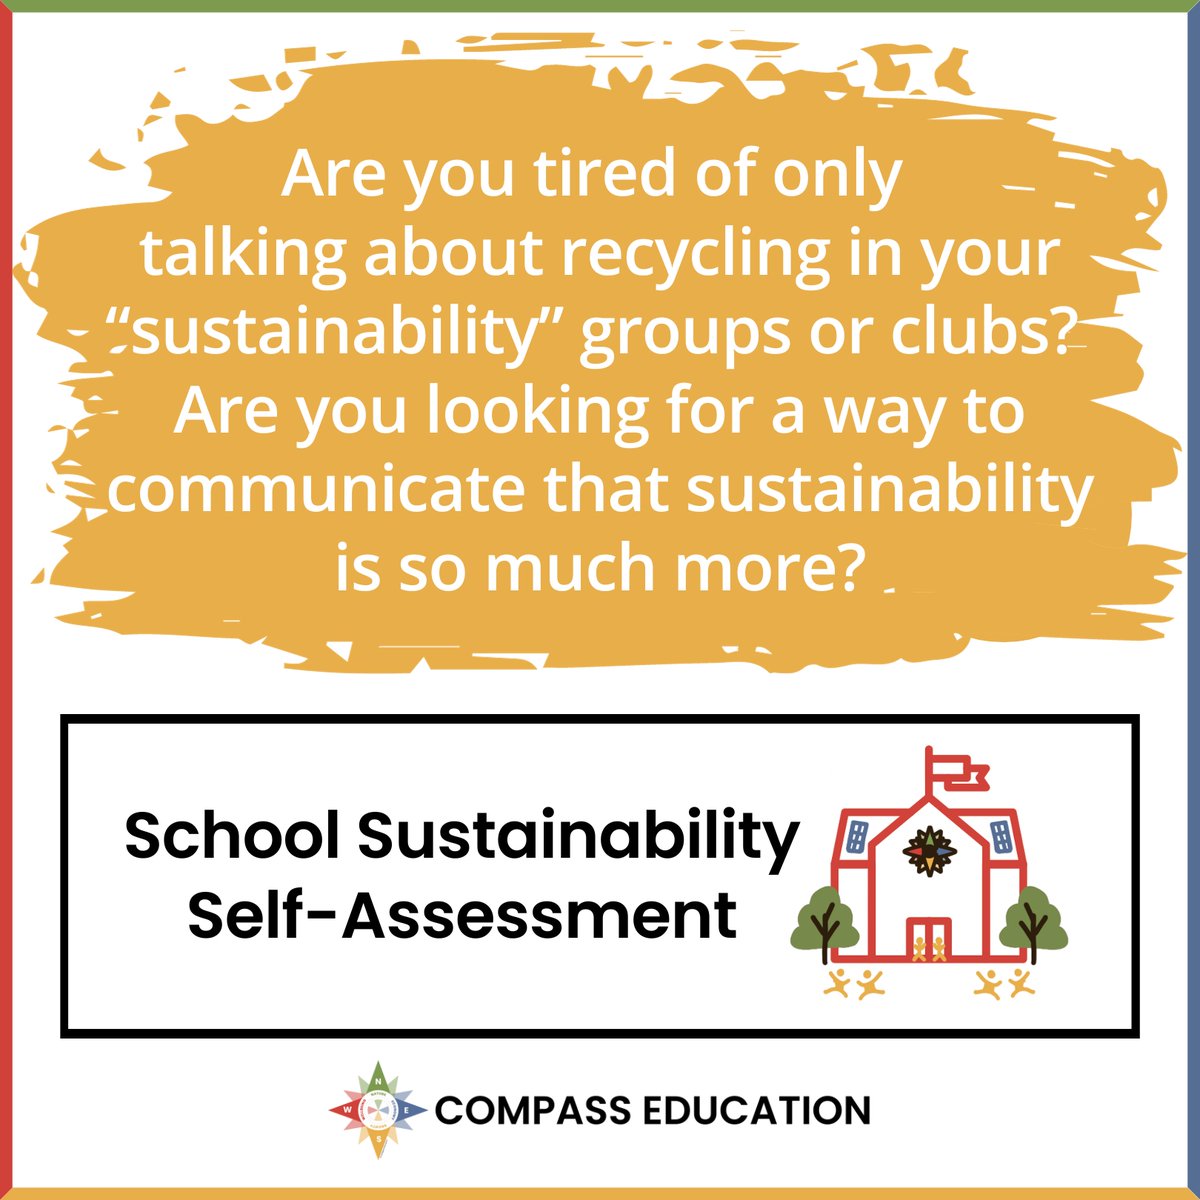 The Compass Education Self-Assessment is primarily concerned with your perception of the existence of sustainability systems in your school community. More info at compasseducation.org/school-sustain… #schoolselfassessment #SustainableSchoolsDay #educationforall #globaleducation